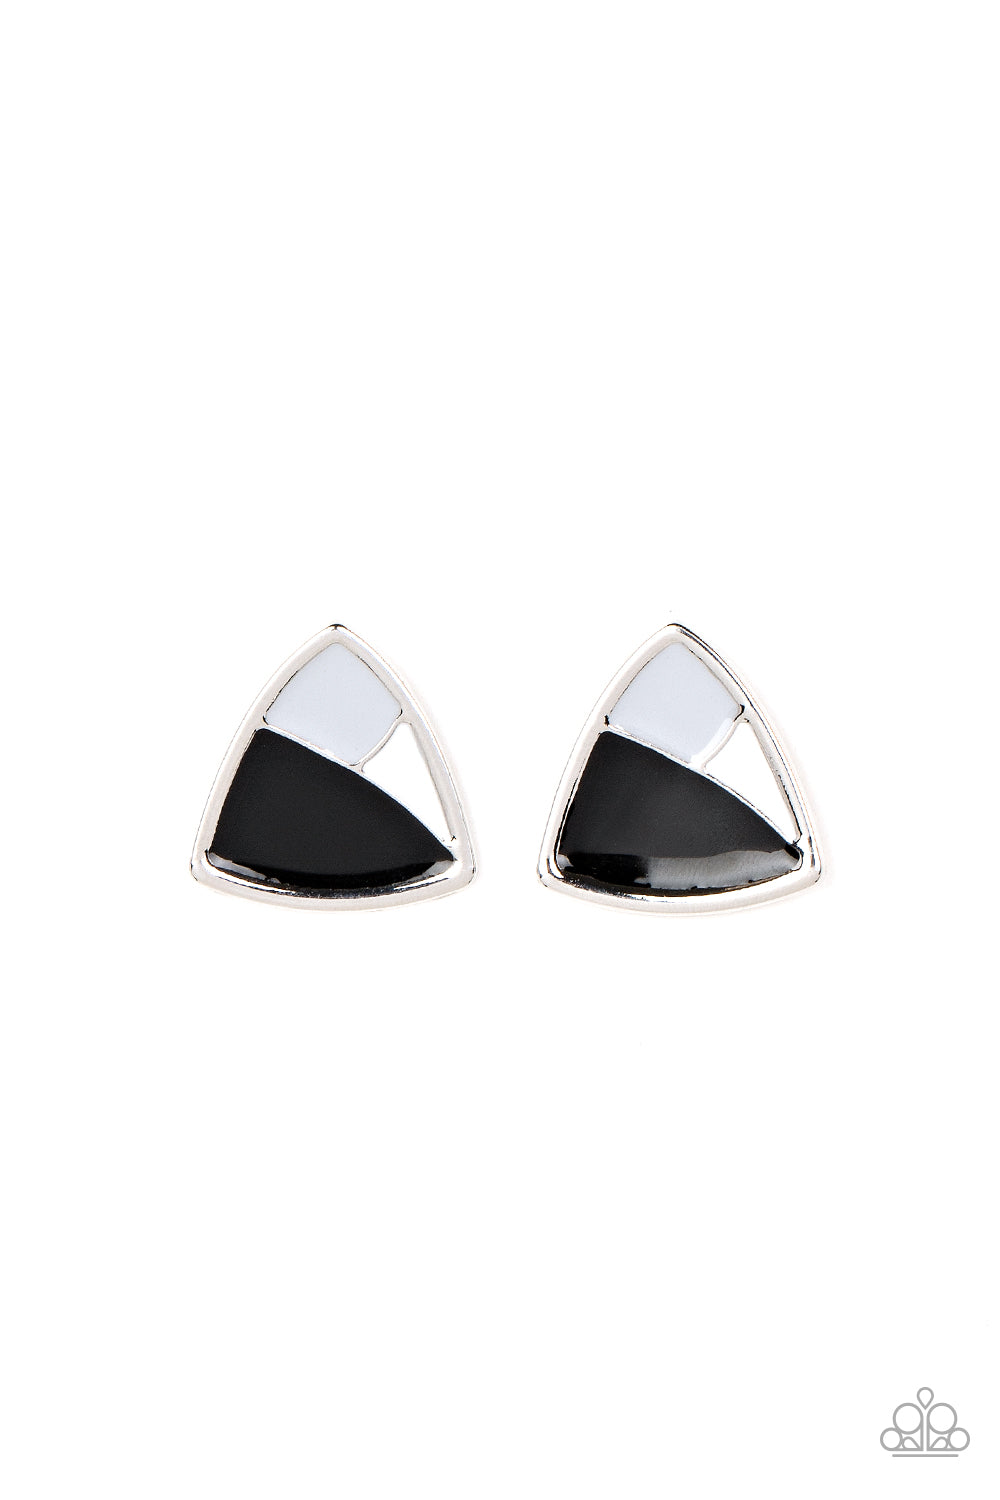 Kaleidoscopic Collision - Black (White Accents) Post Earring